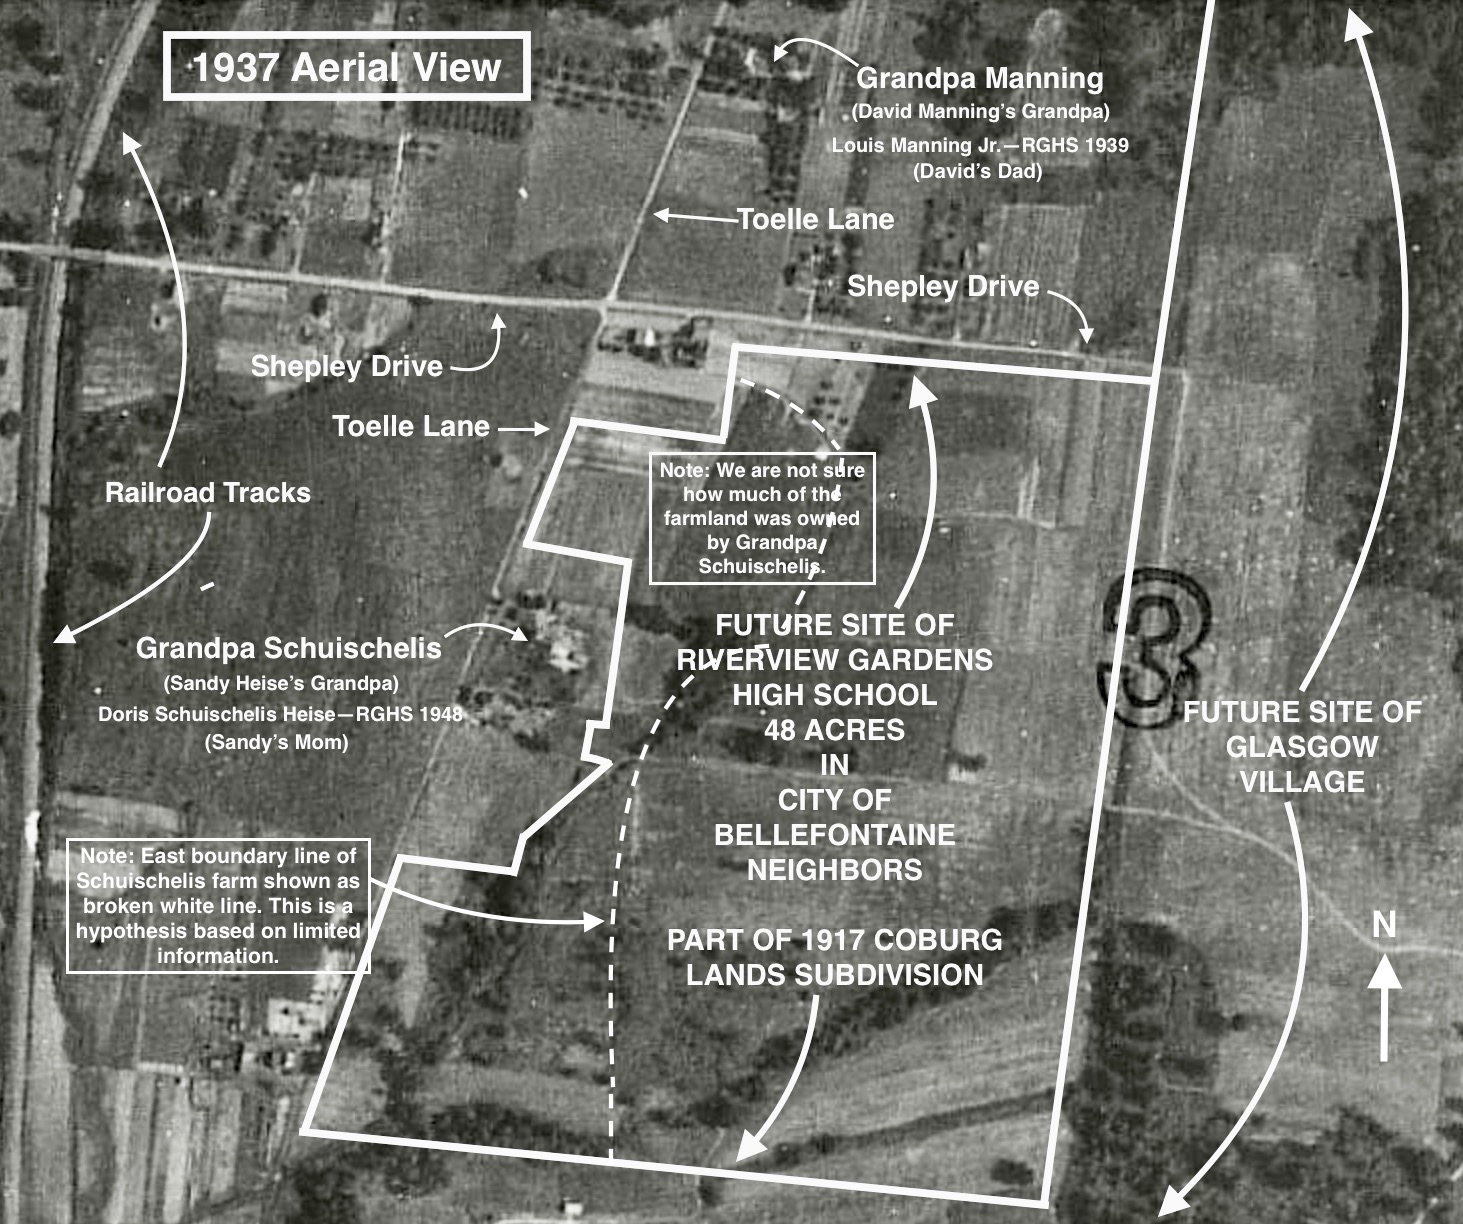 1937 AERIAL VIEW: SHEPLEY DRIVE AND TOELLE LANE. ST. LOUIS COUNTY REAL ESTATE INFORMATION